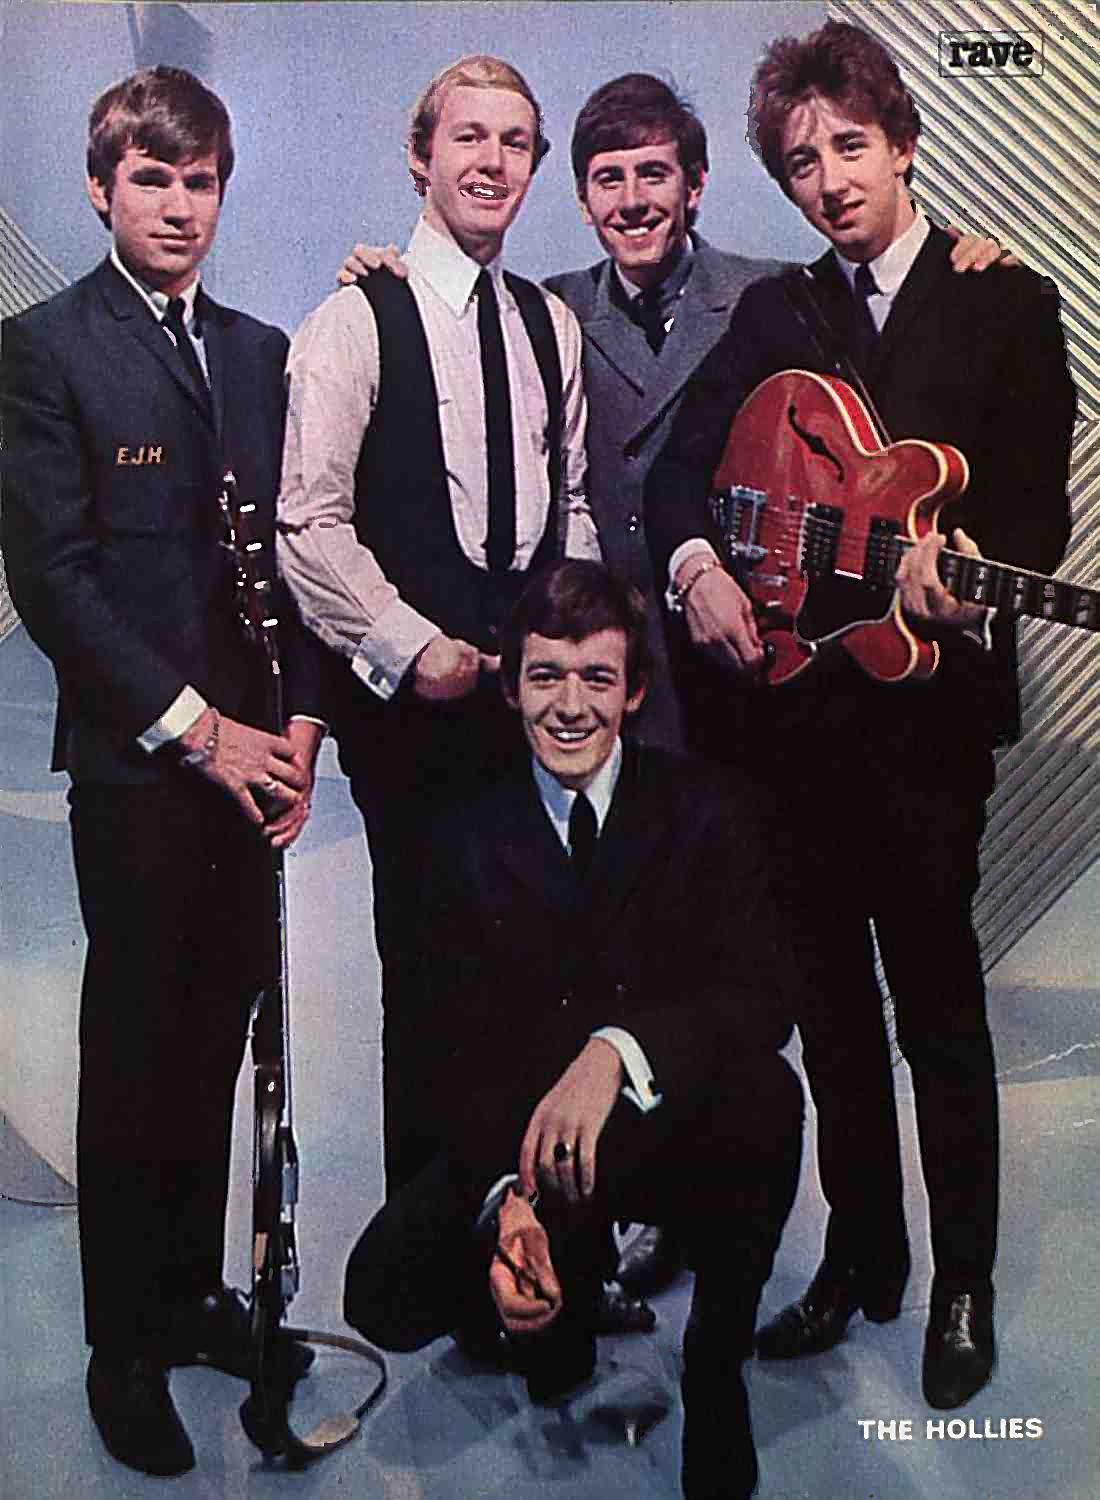 The Hollies Allan Clarke Graham Nash & Group 1960's in Concert 11x17 Mini Poster 